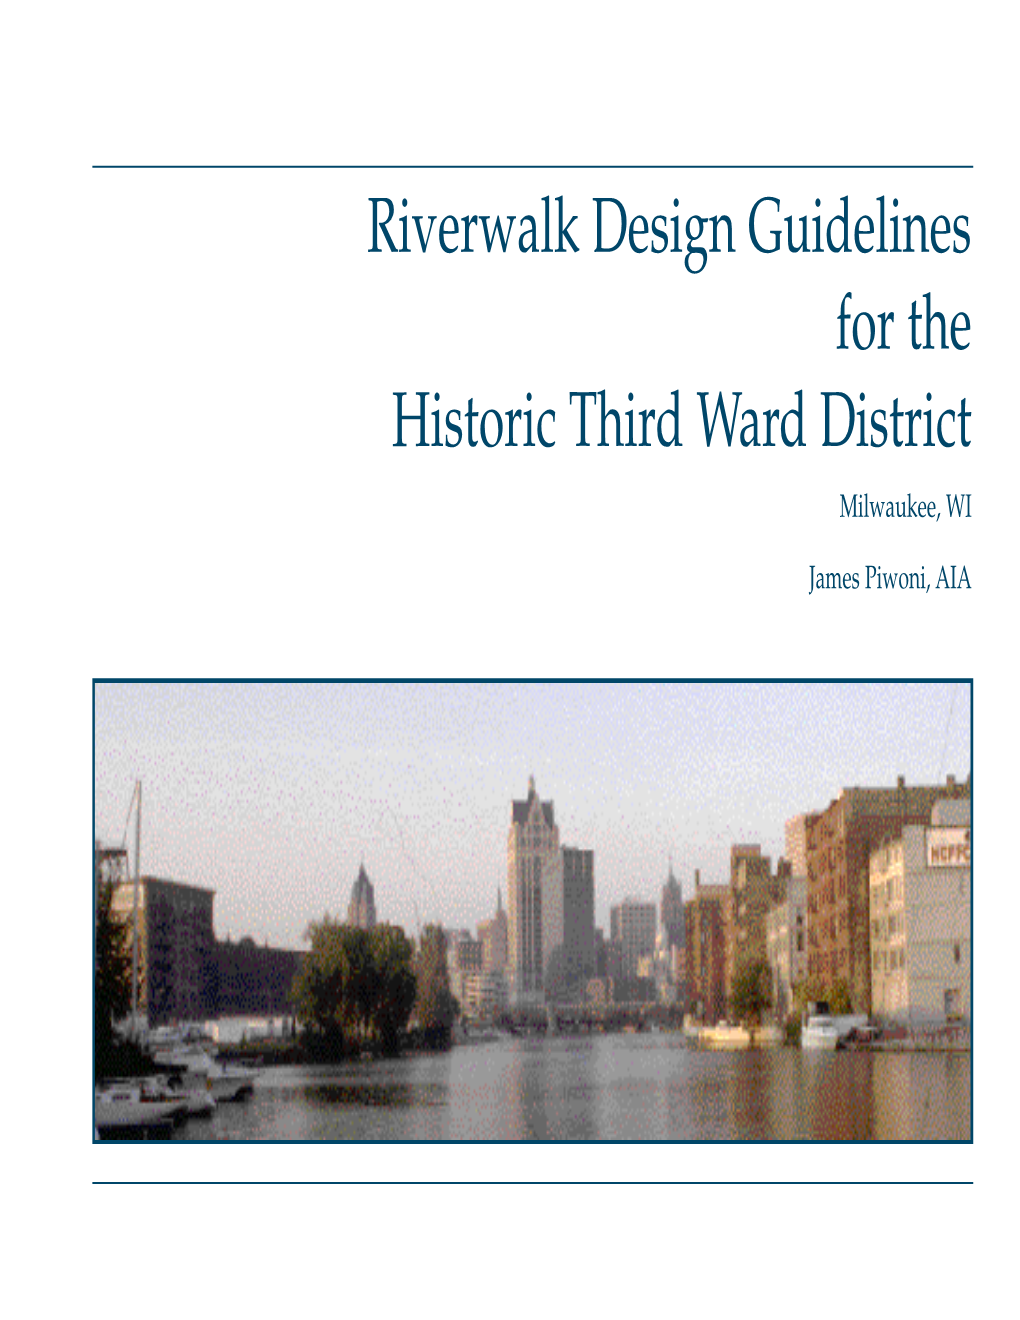 Riverwalk Design Guidelines for the Historic Third Ward District Milwaukee, WI